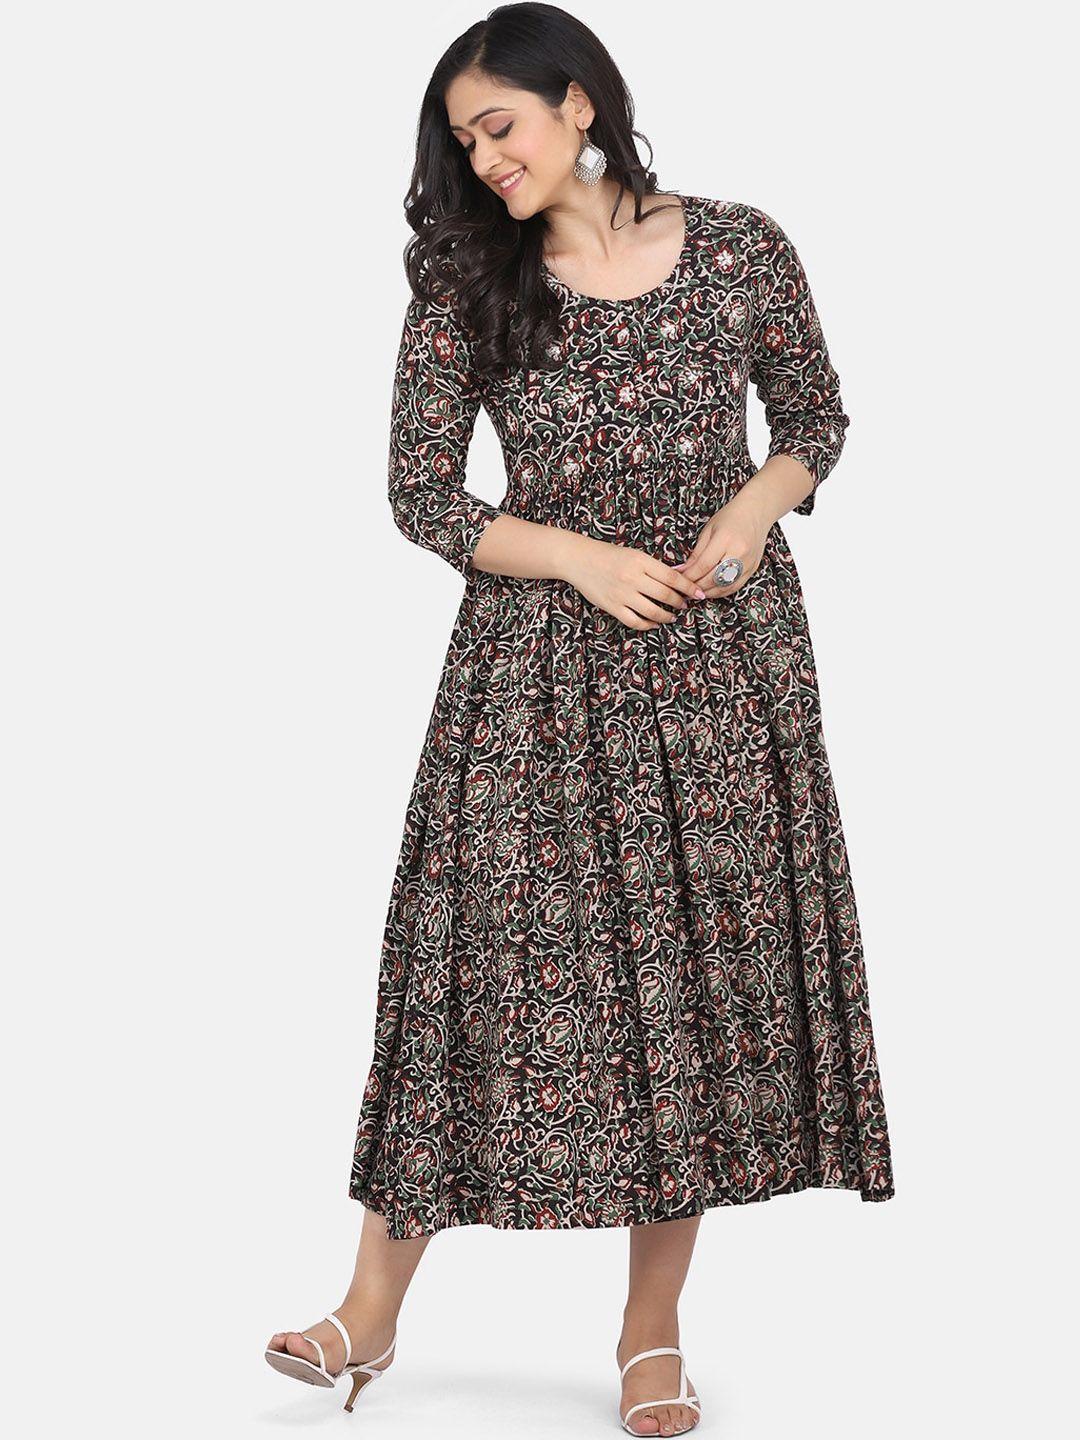 saanjh black floral printed pure cotton fit & flare midi dress